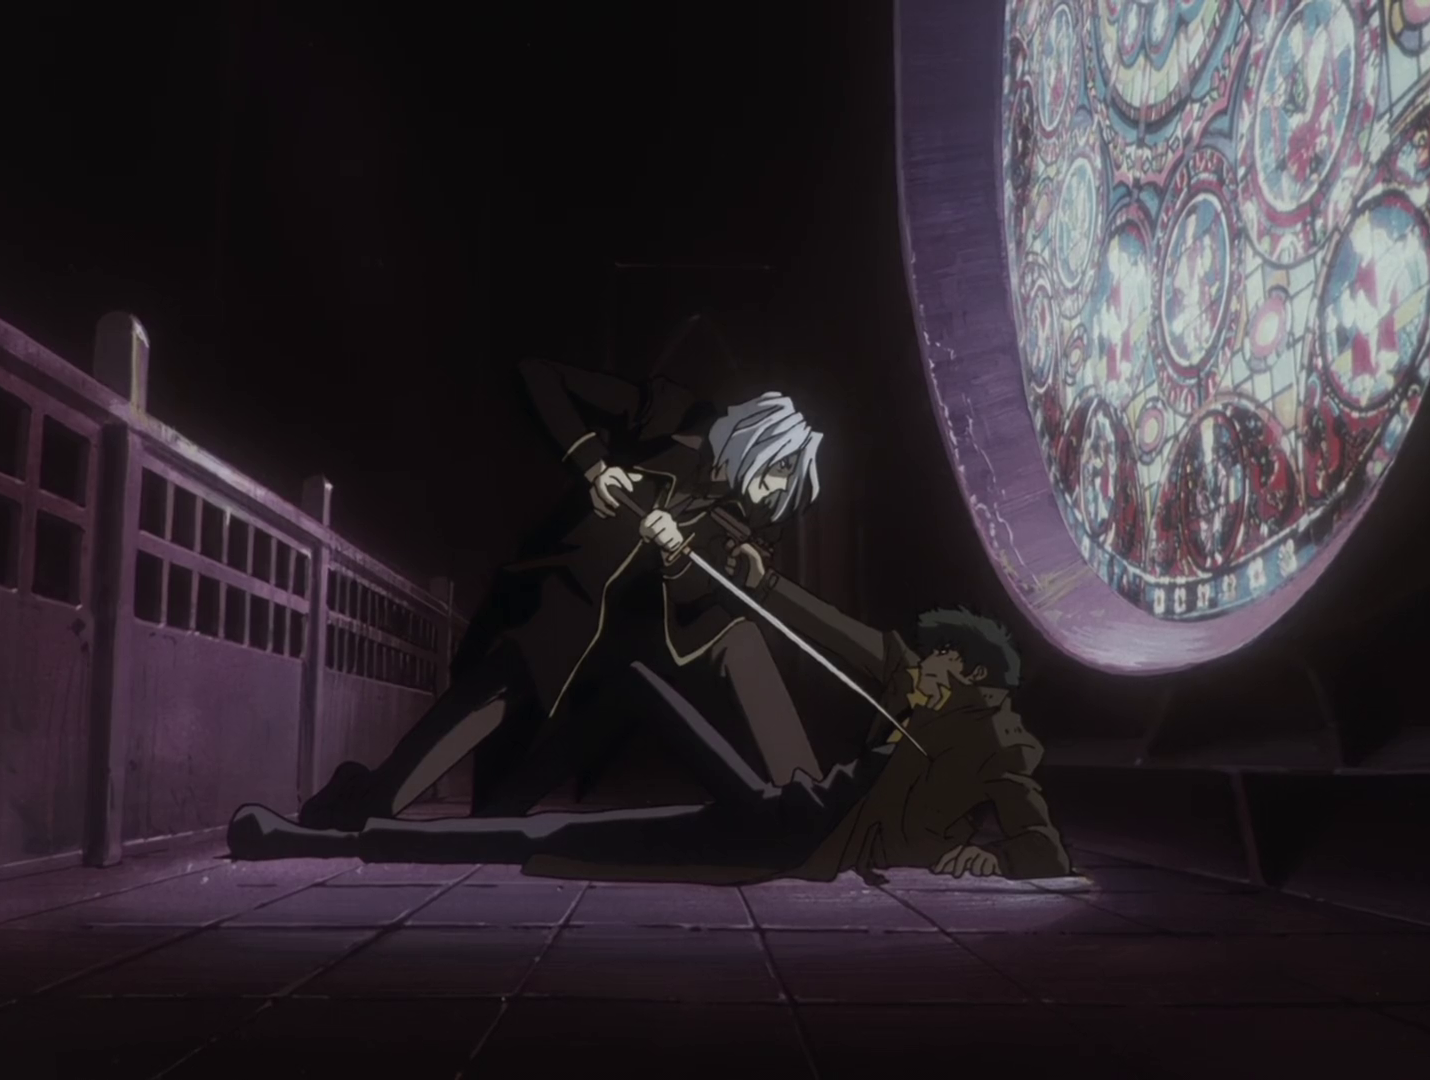 A Cathedral on Mars: the church in episode 5 of Cowboy Bebop and its relation to Chartres